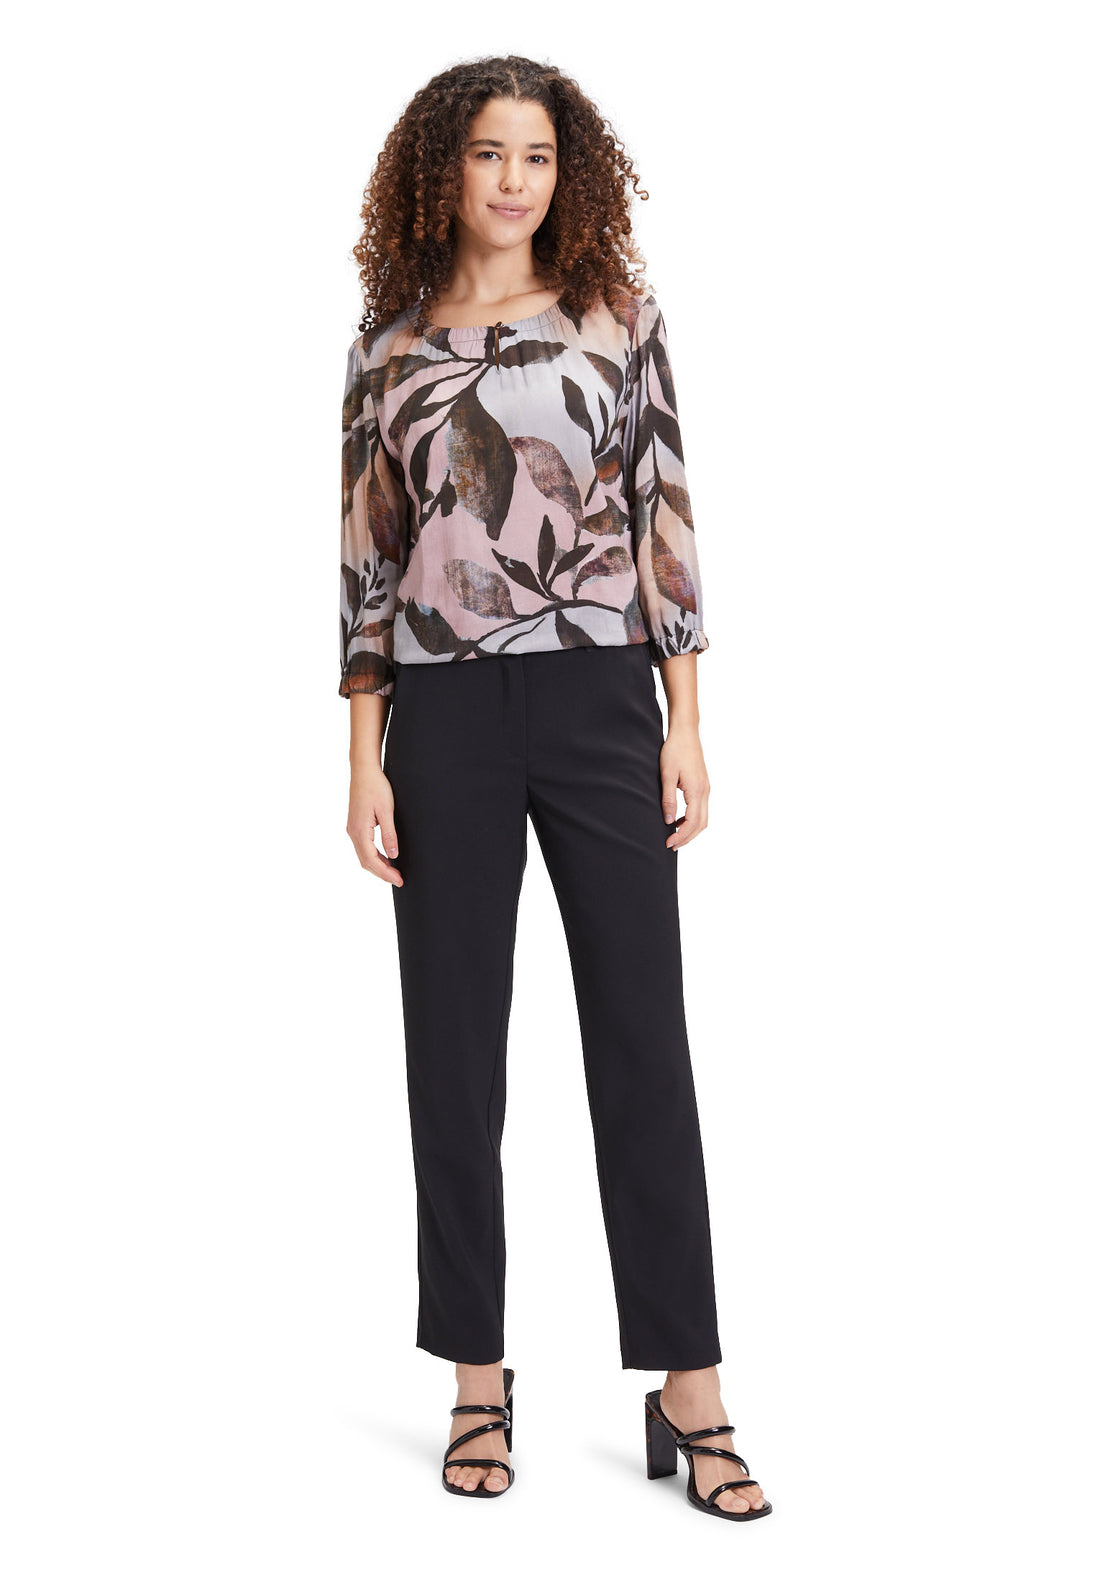 Business Trousers
With Crease_6002-1080_9045_01